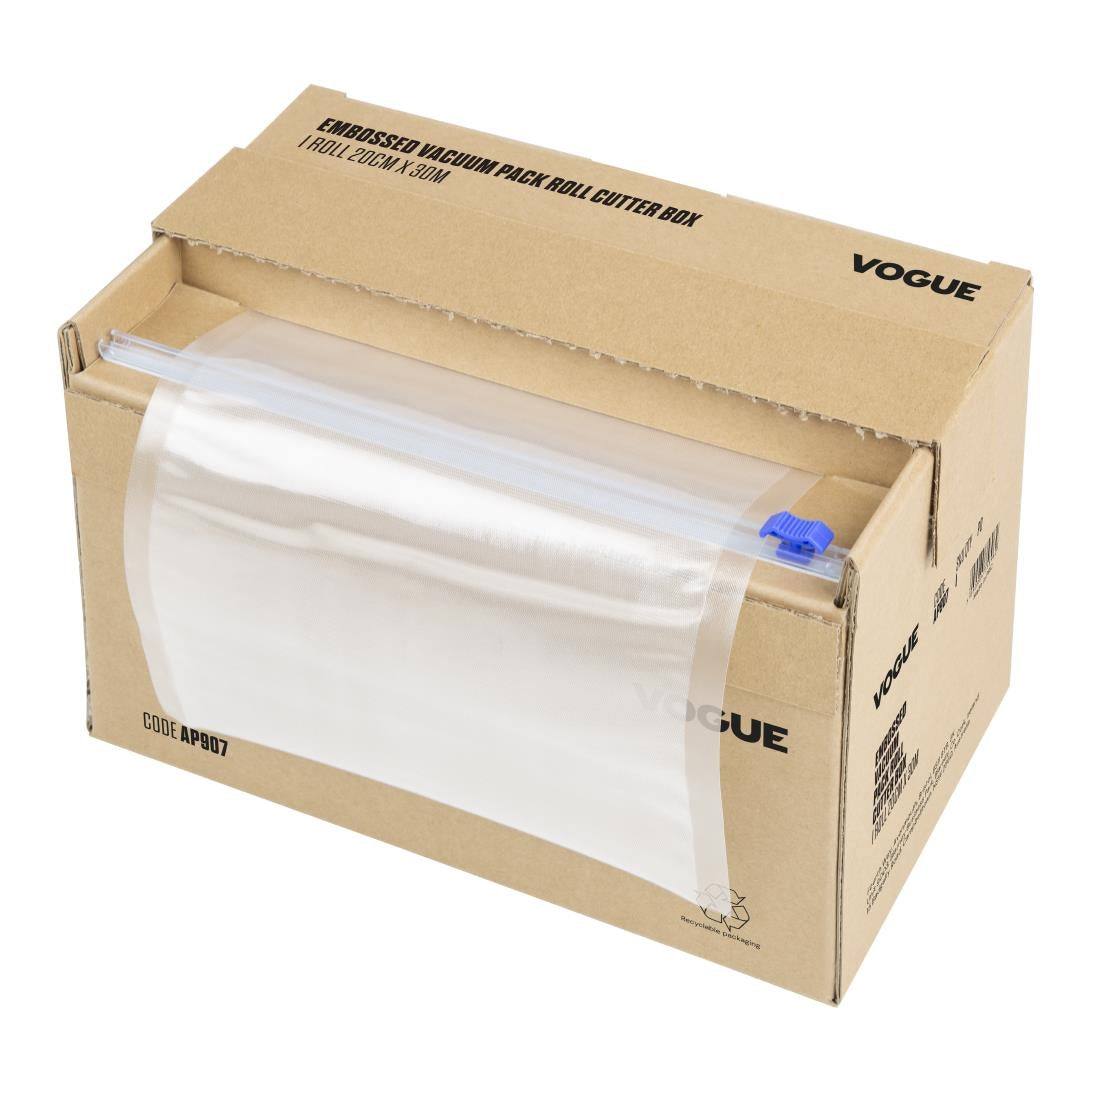 AP907 Vogue Vacuum Pack Roll with Cutter Box (Embossed) 200mm width